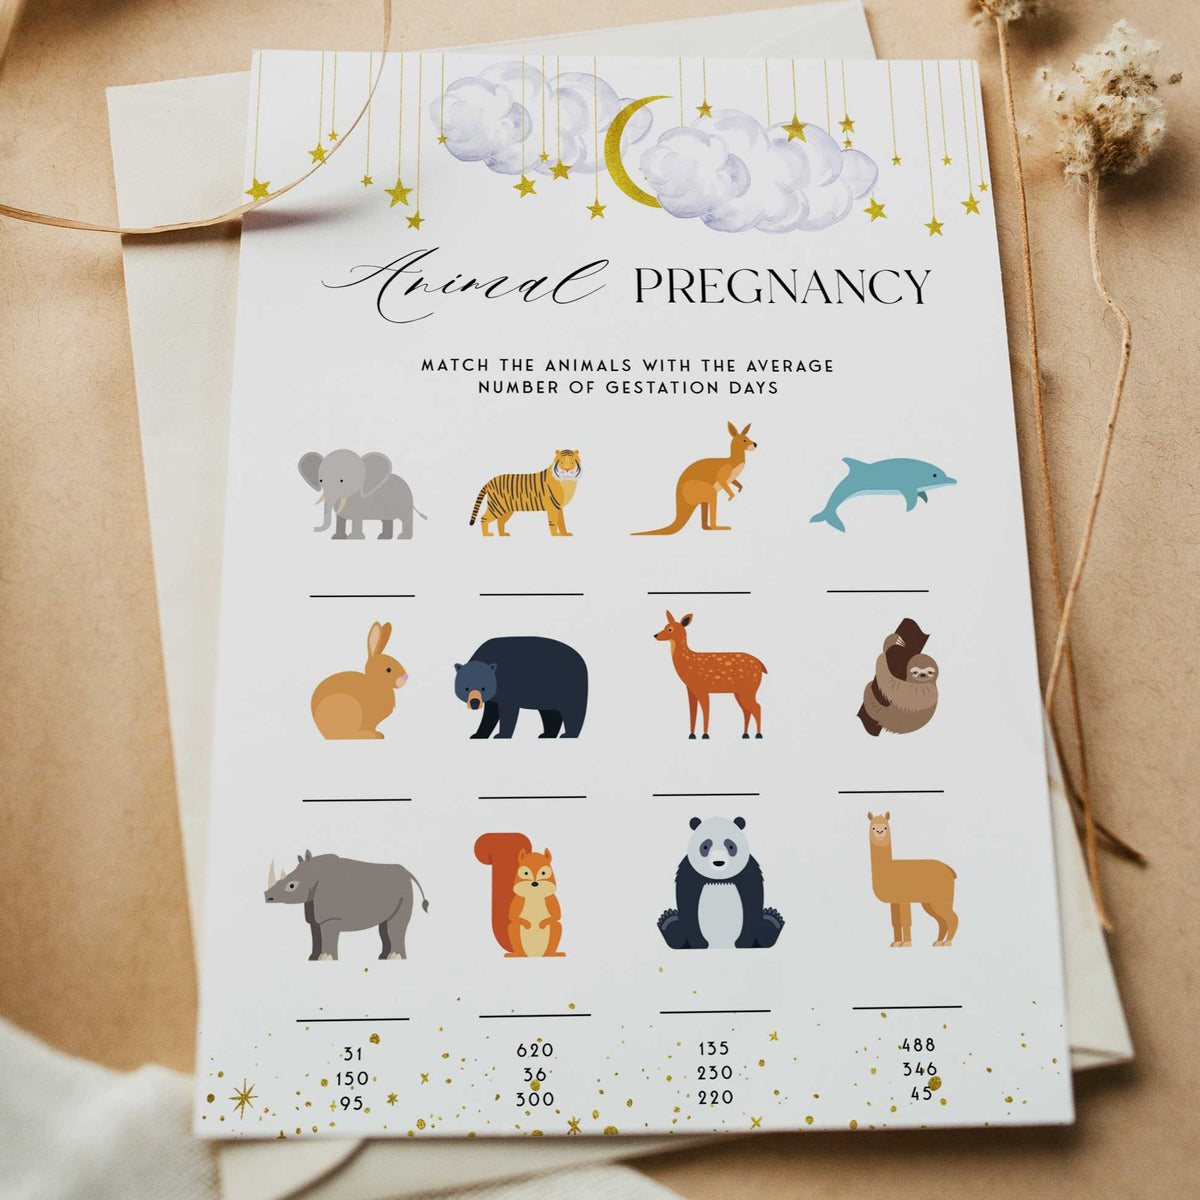 Fully editable and printable baby shower animal pregnancy game with a little star design. Perfect for a Twinkle Little Star baby shower themed party